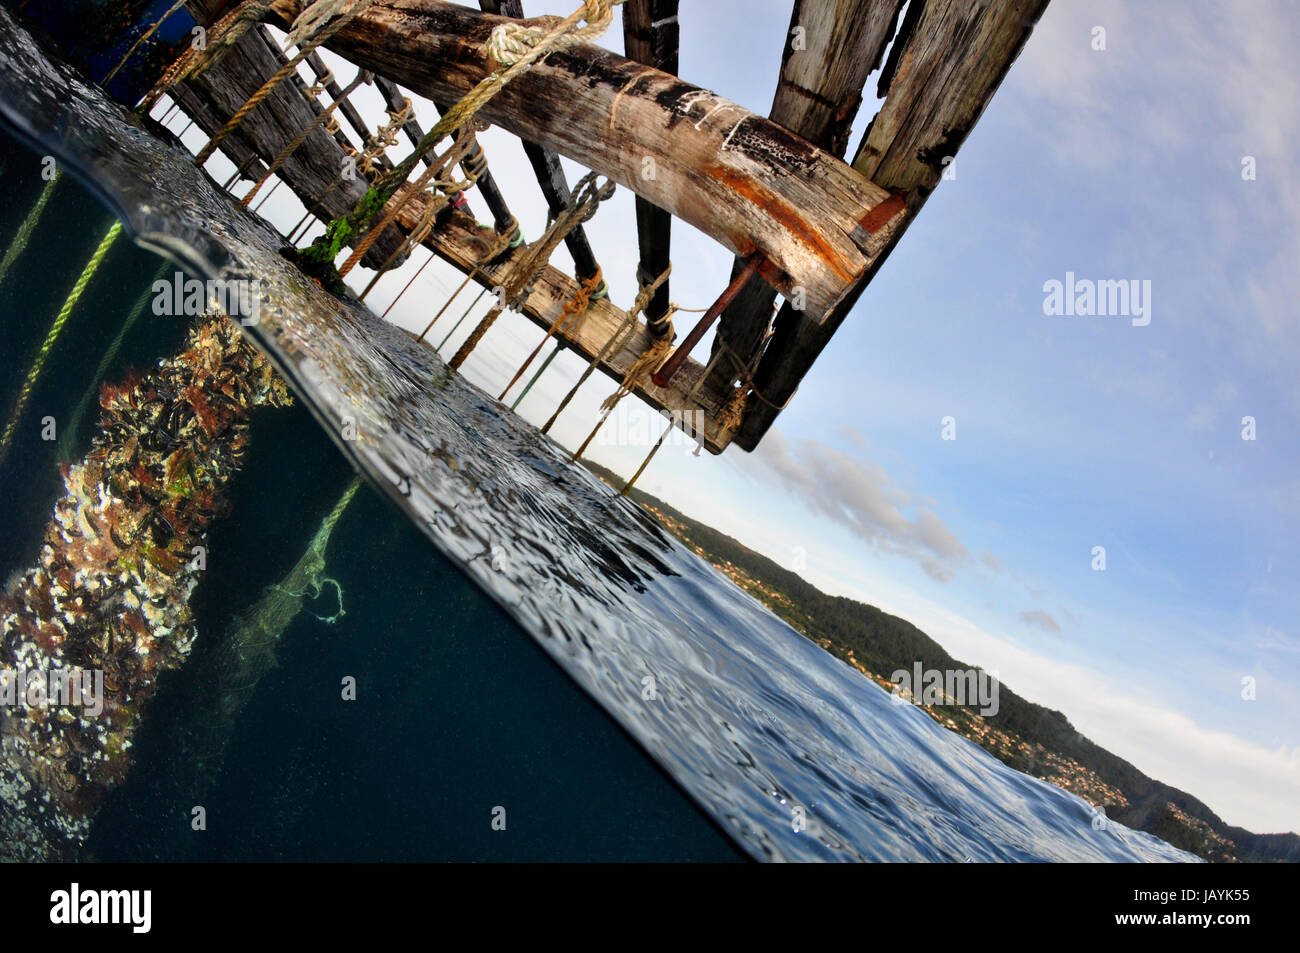 Mussel raft in Galician waters showing how the ropes are attached to the raft and hang into the water Stock Photo